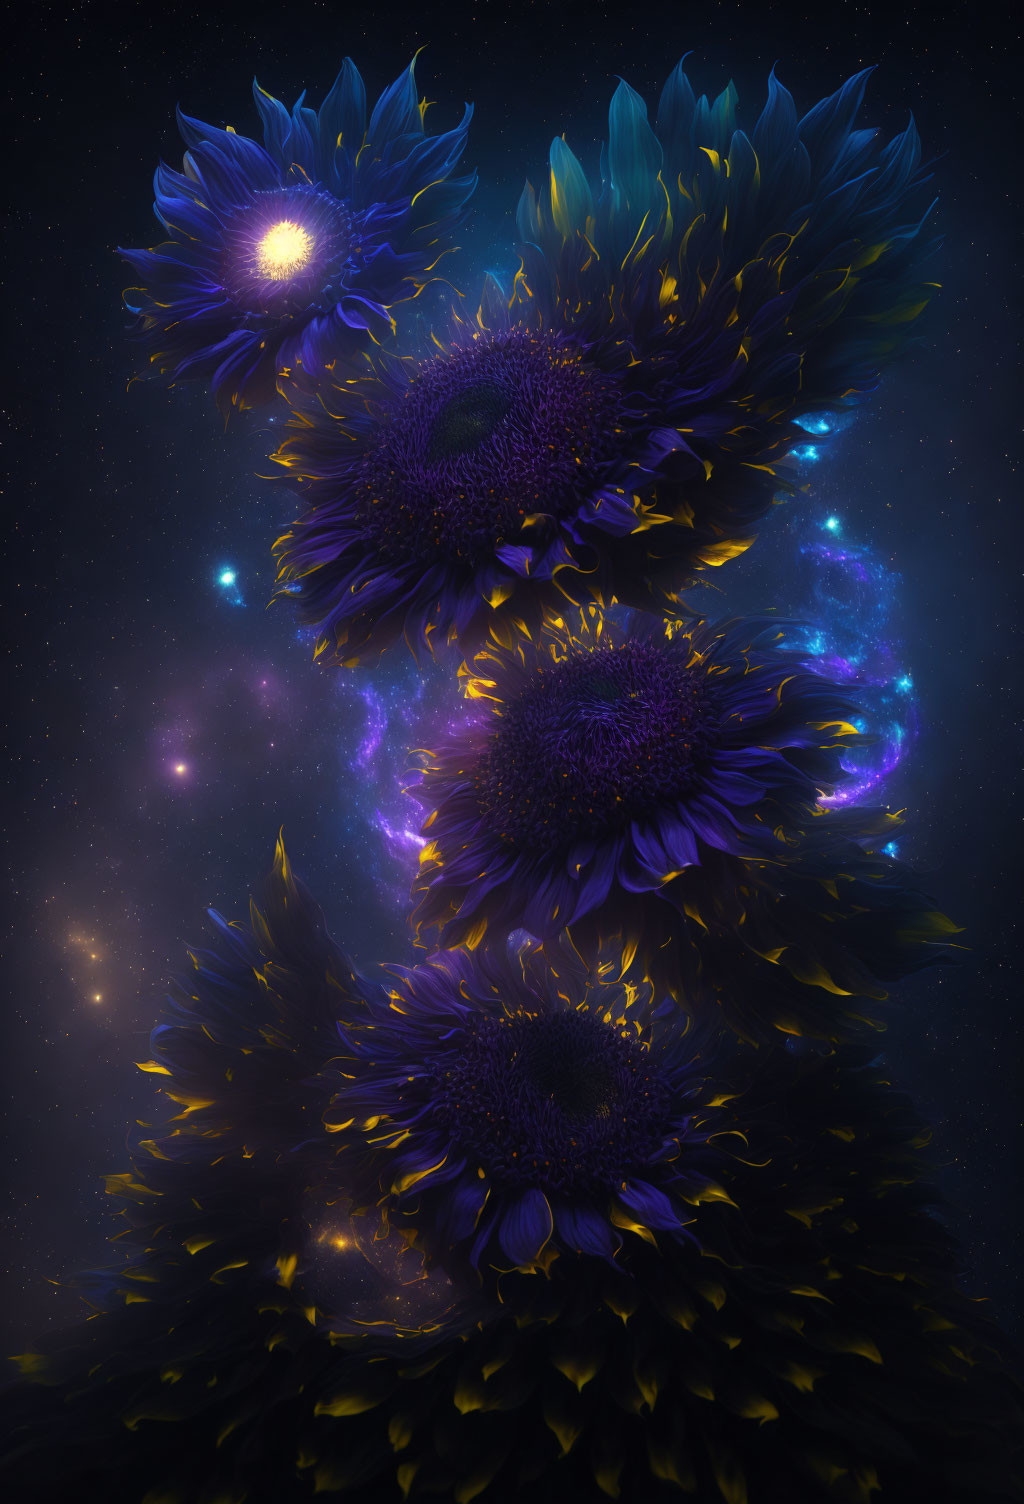 Sunflowers in the middle of the space